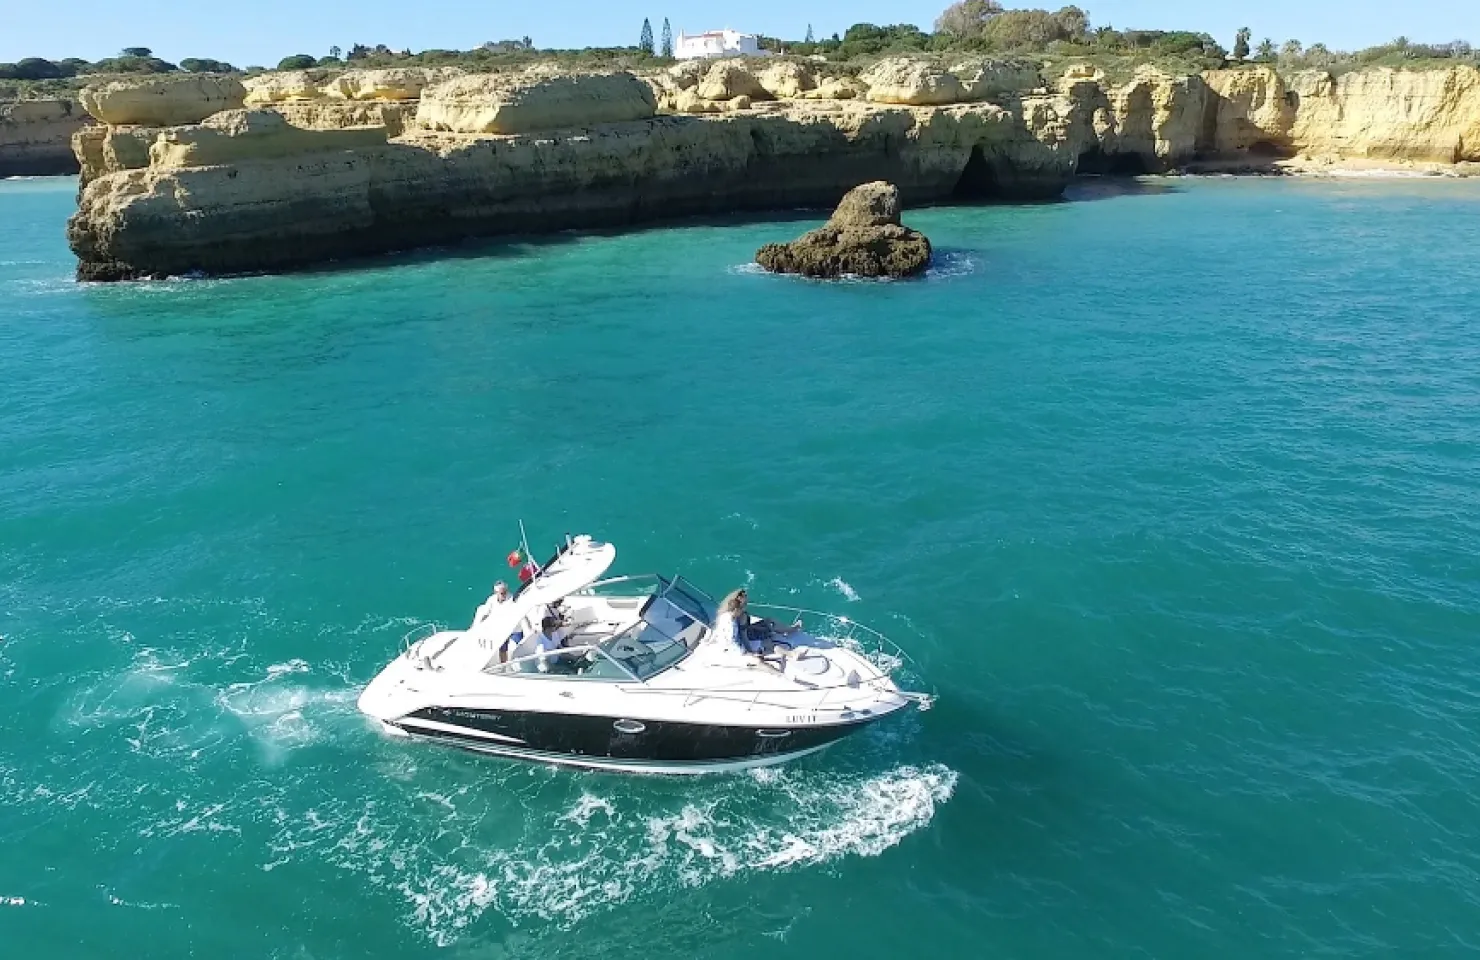 Luvit Yacht Charters - Algarve Boat Trips and Tours - Vilamoura 